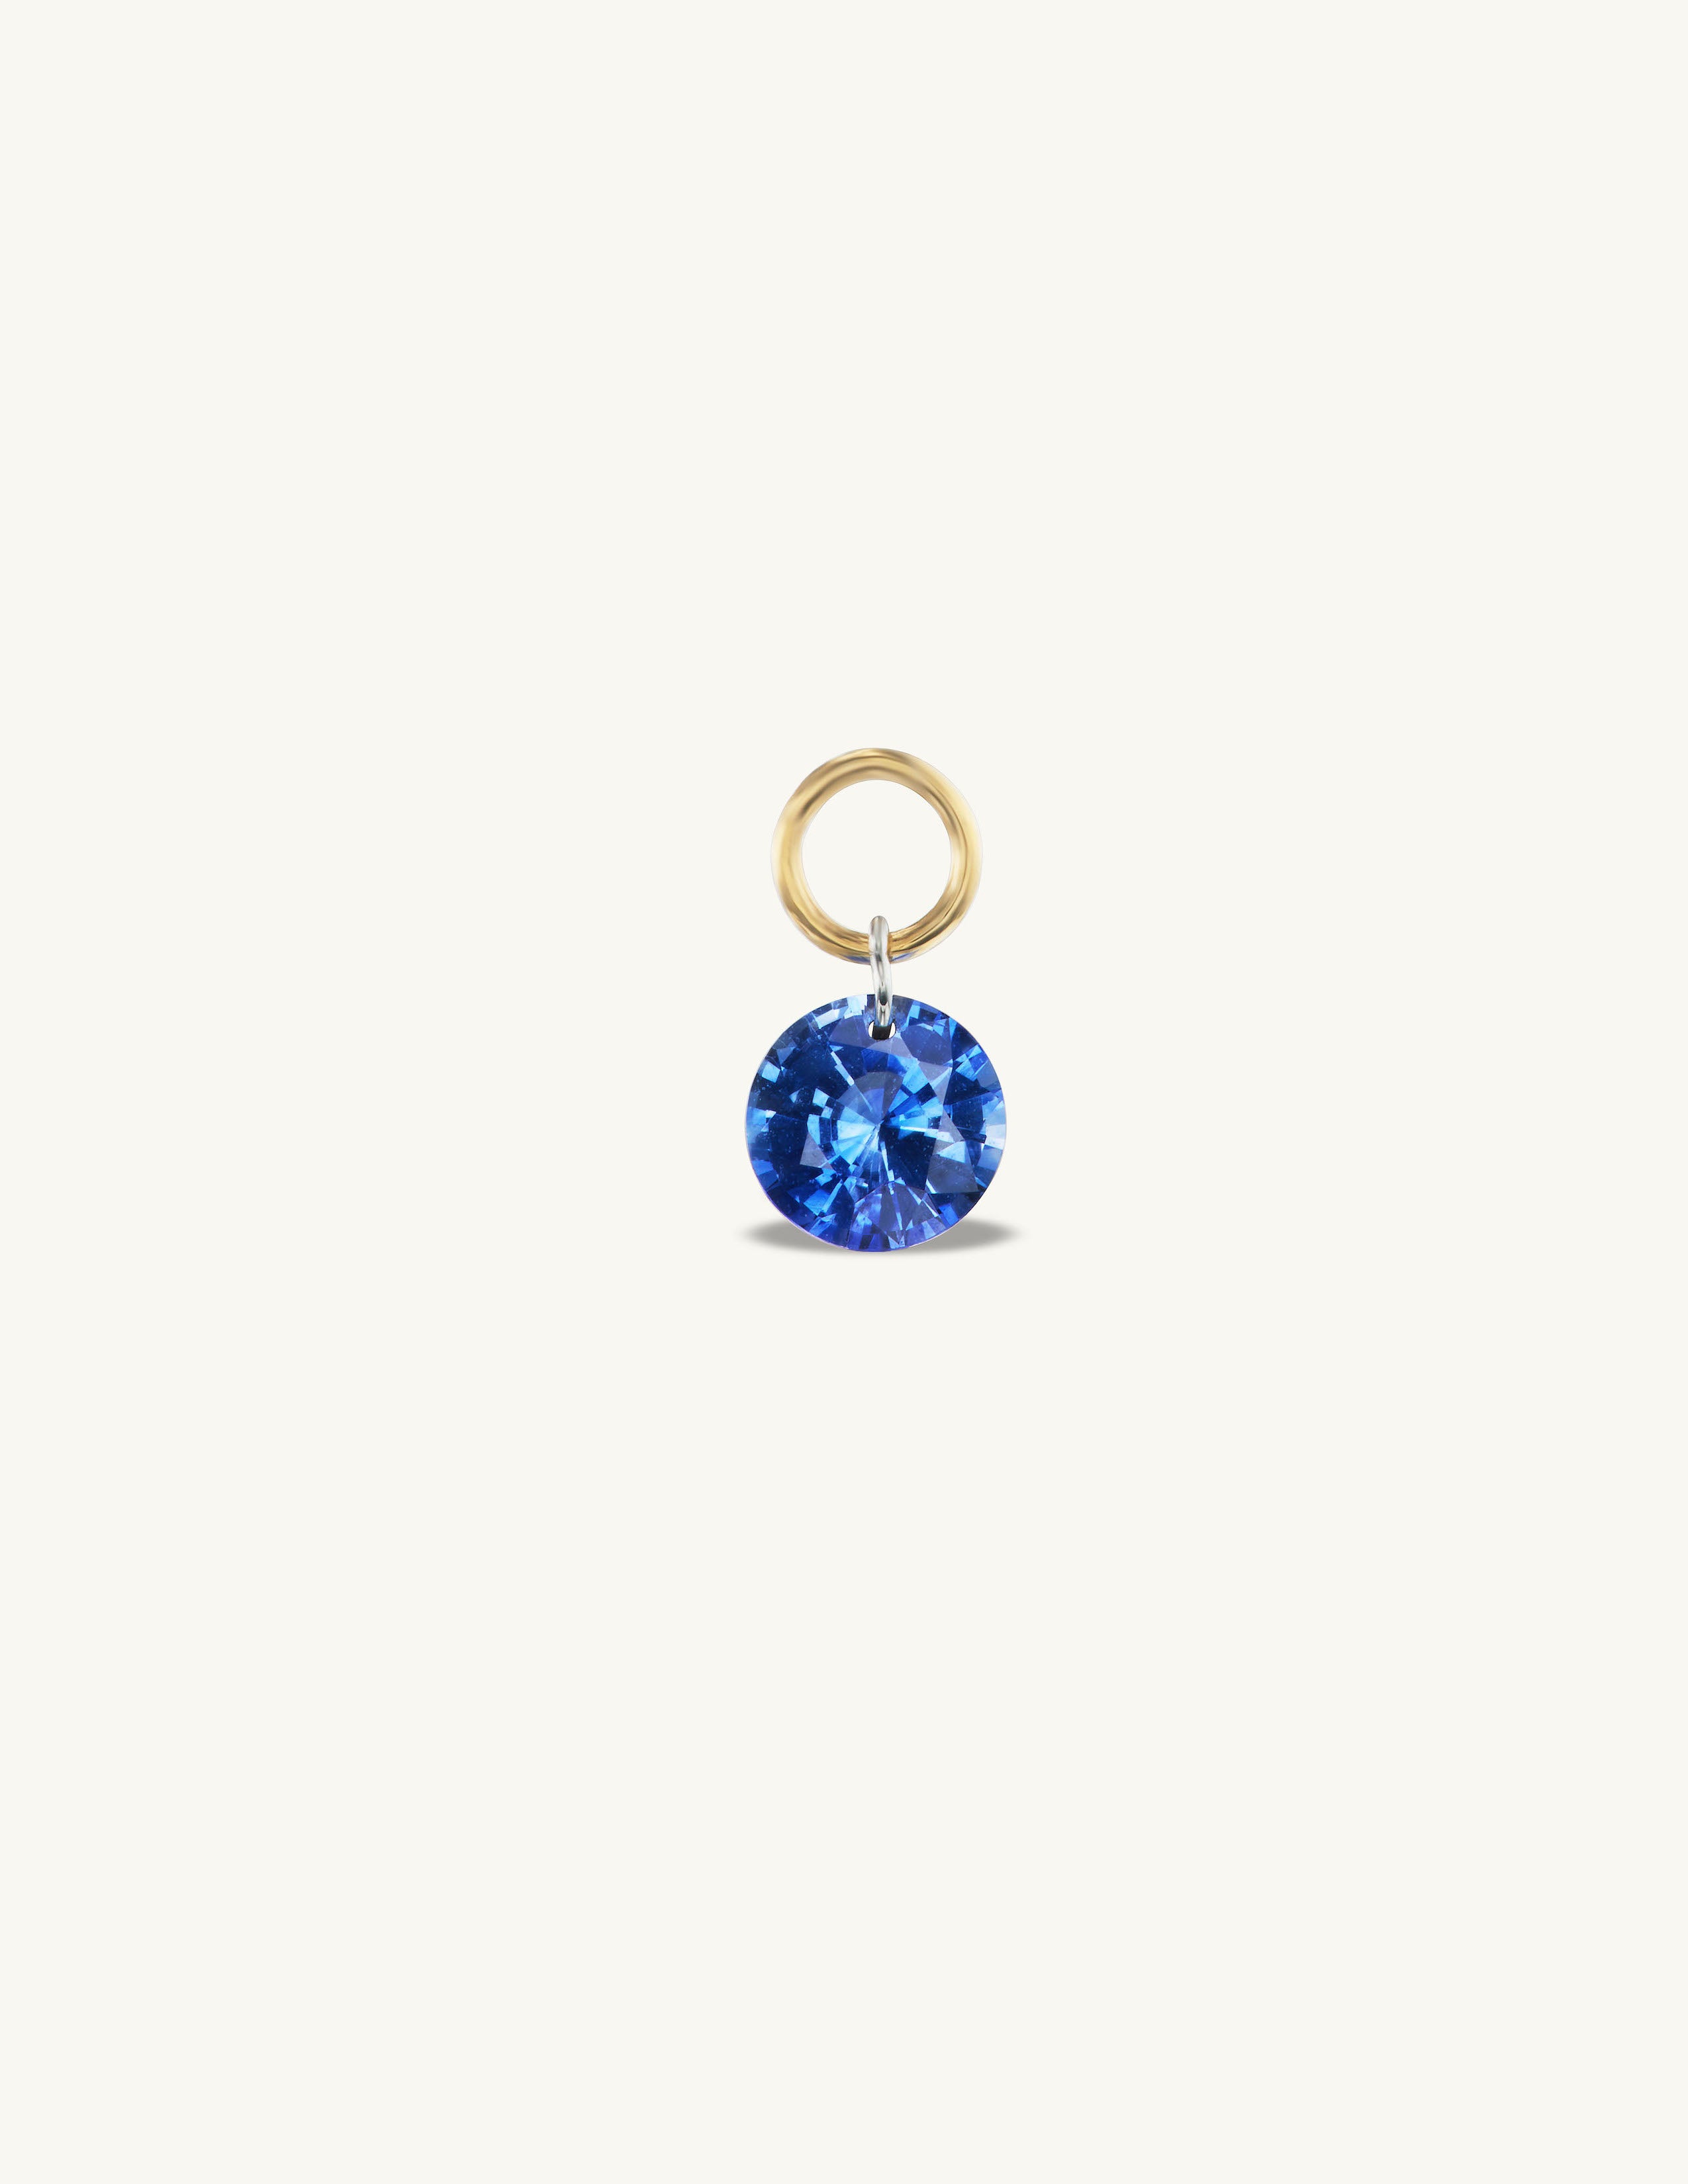 Small Round Pierced Blue Sapphire Charm for Huggies